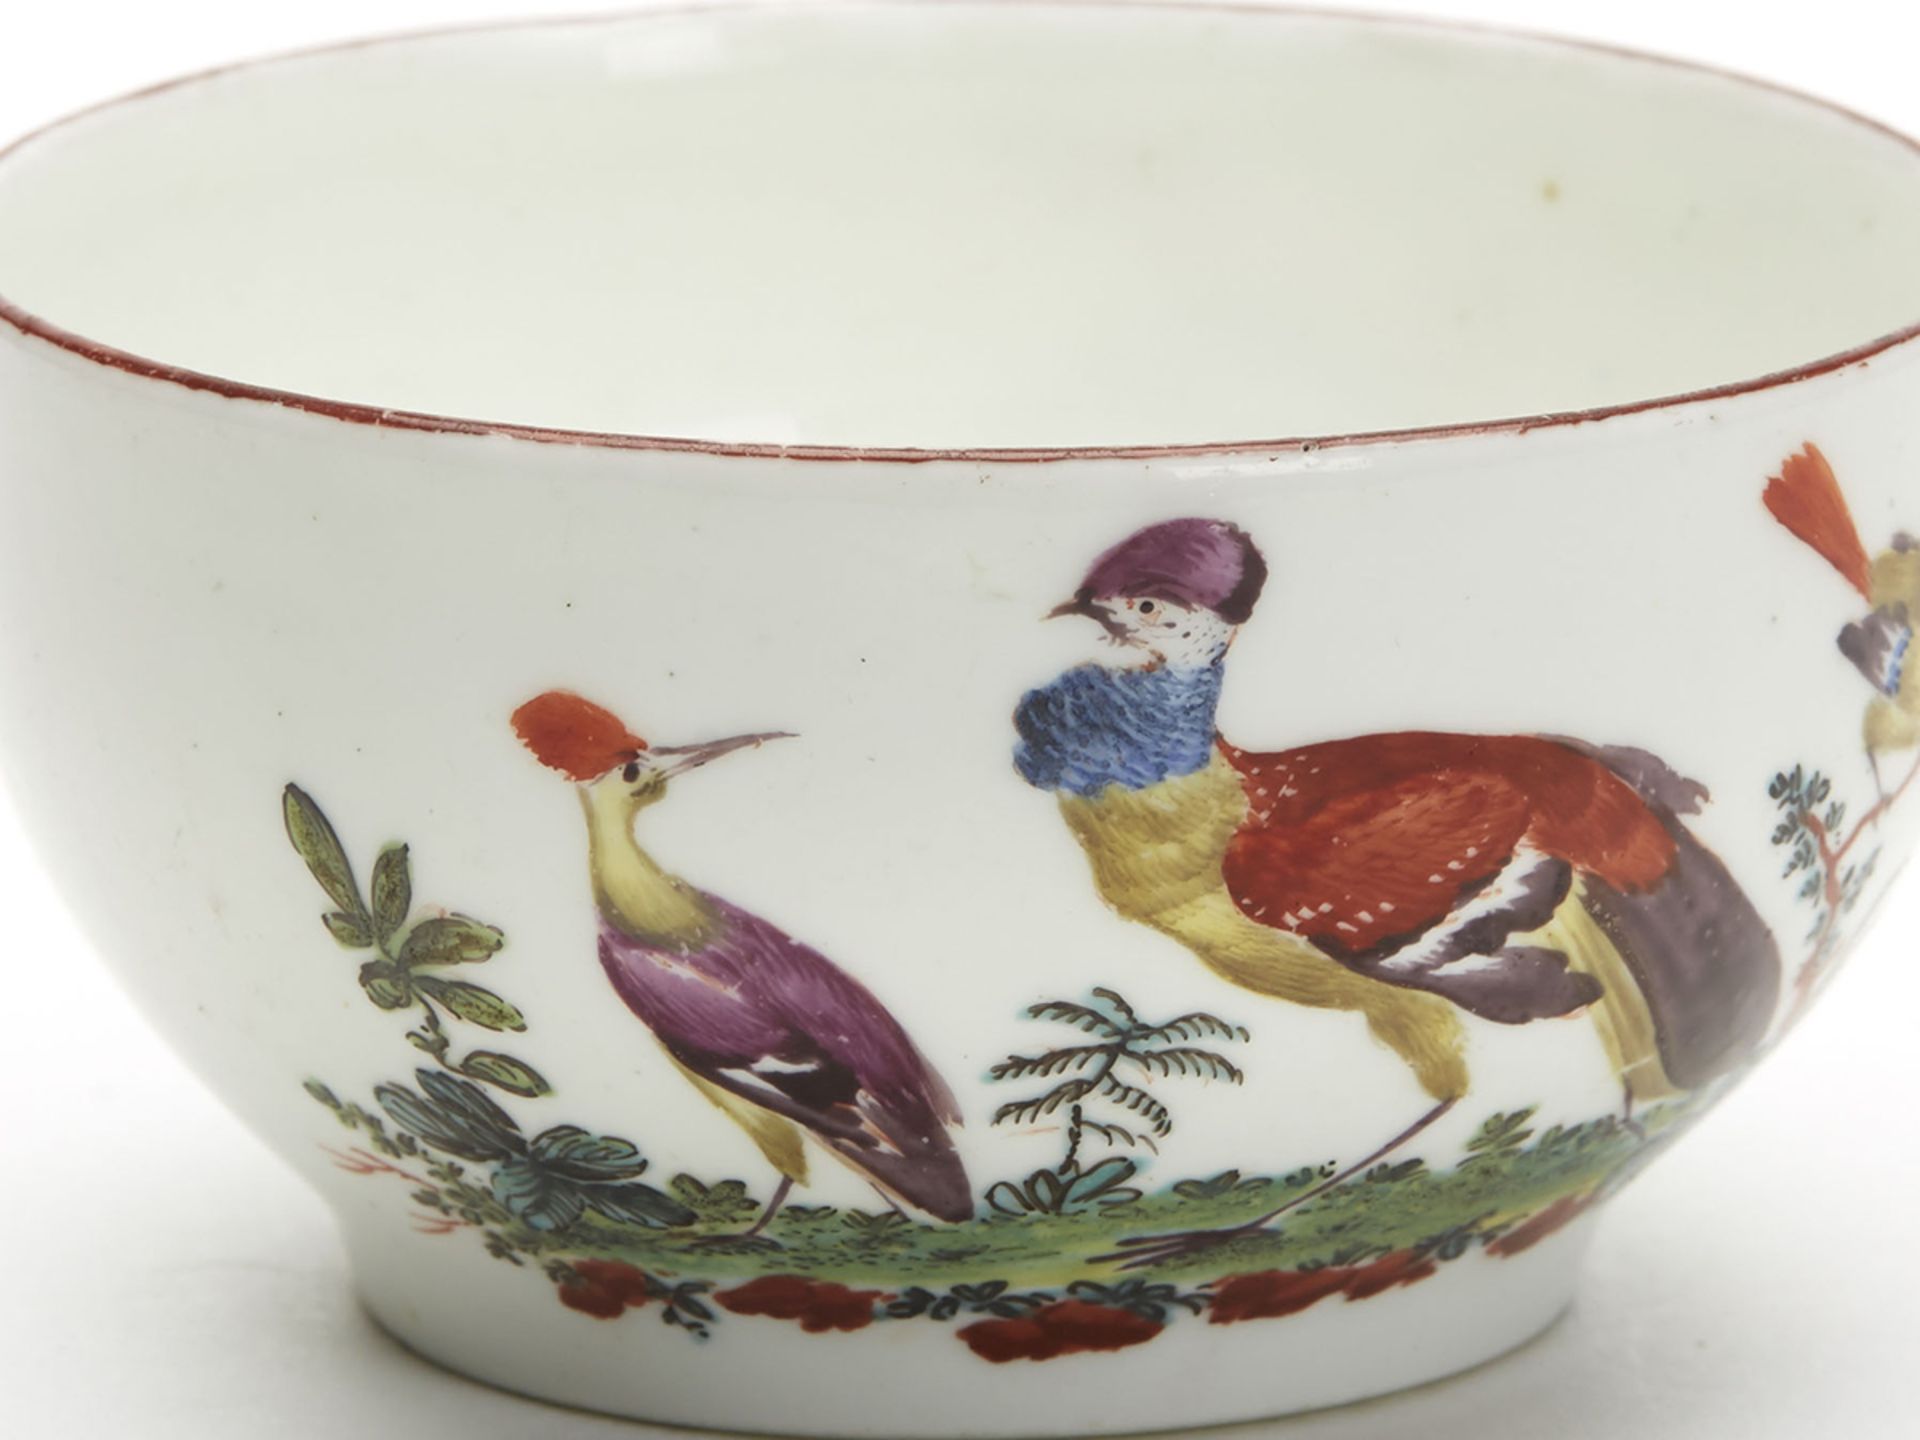 ANTIQUE EARLY CHELSEA BIRD PAINTED TEABOWL 18TH C. - Image 4 of 7